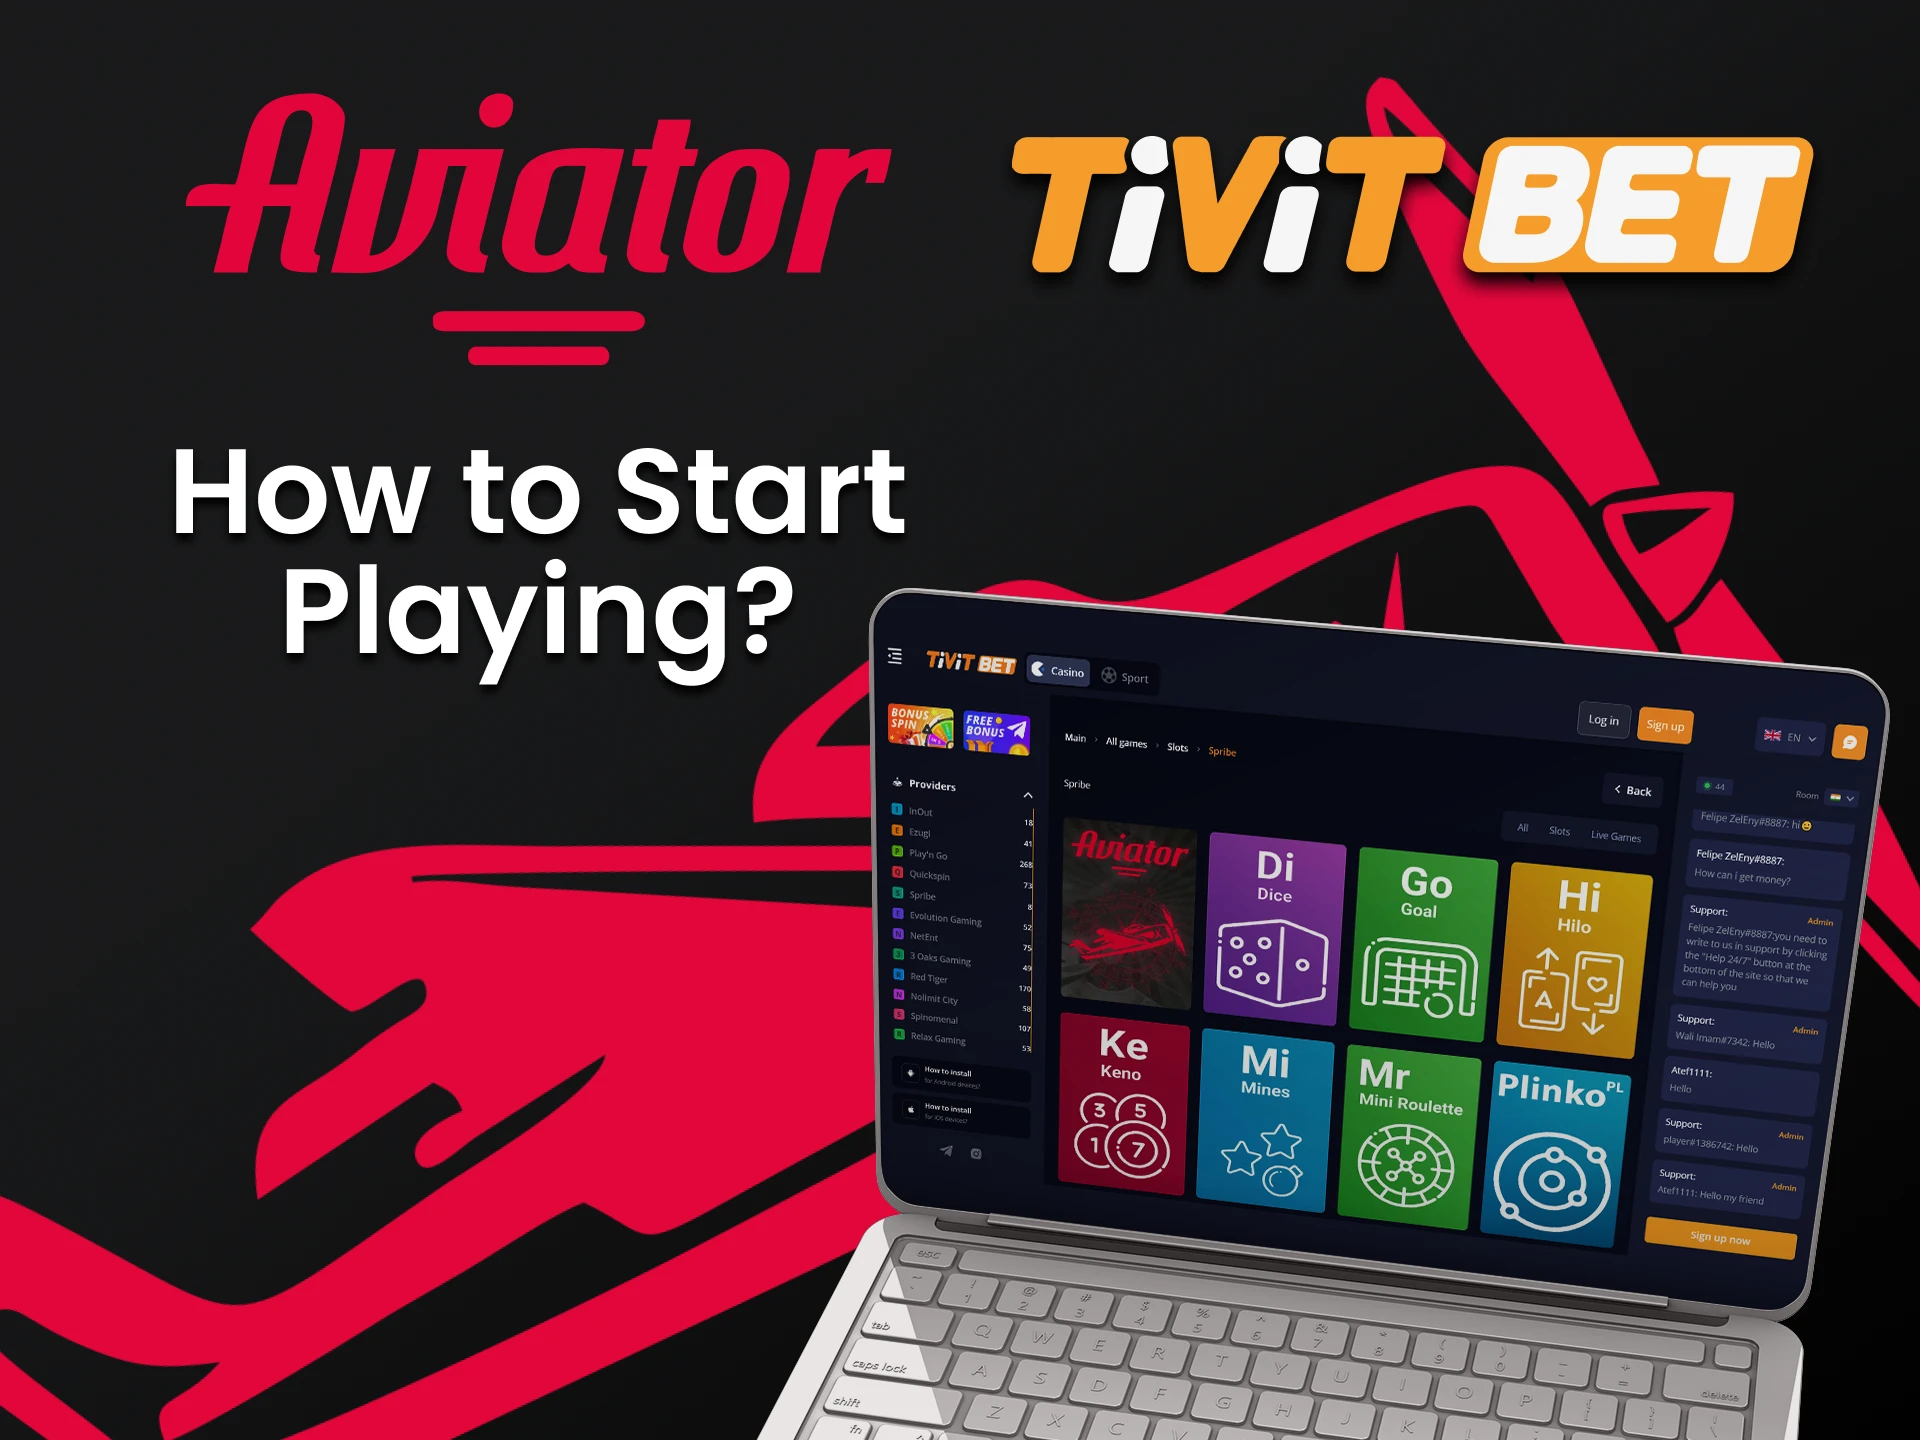 Choose Aviator in the casino section of Tivitbet.